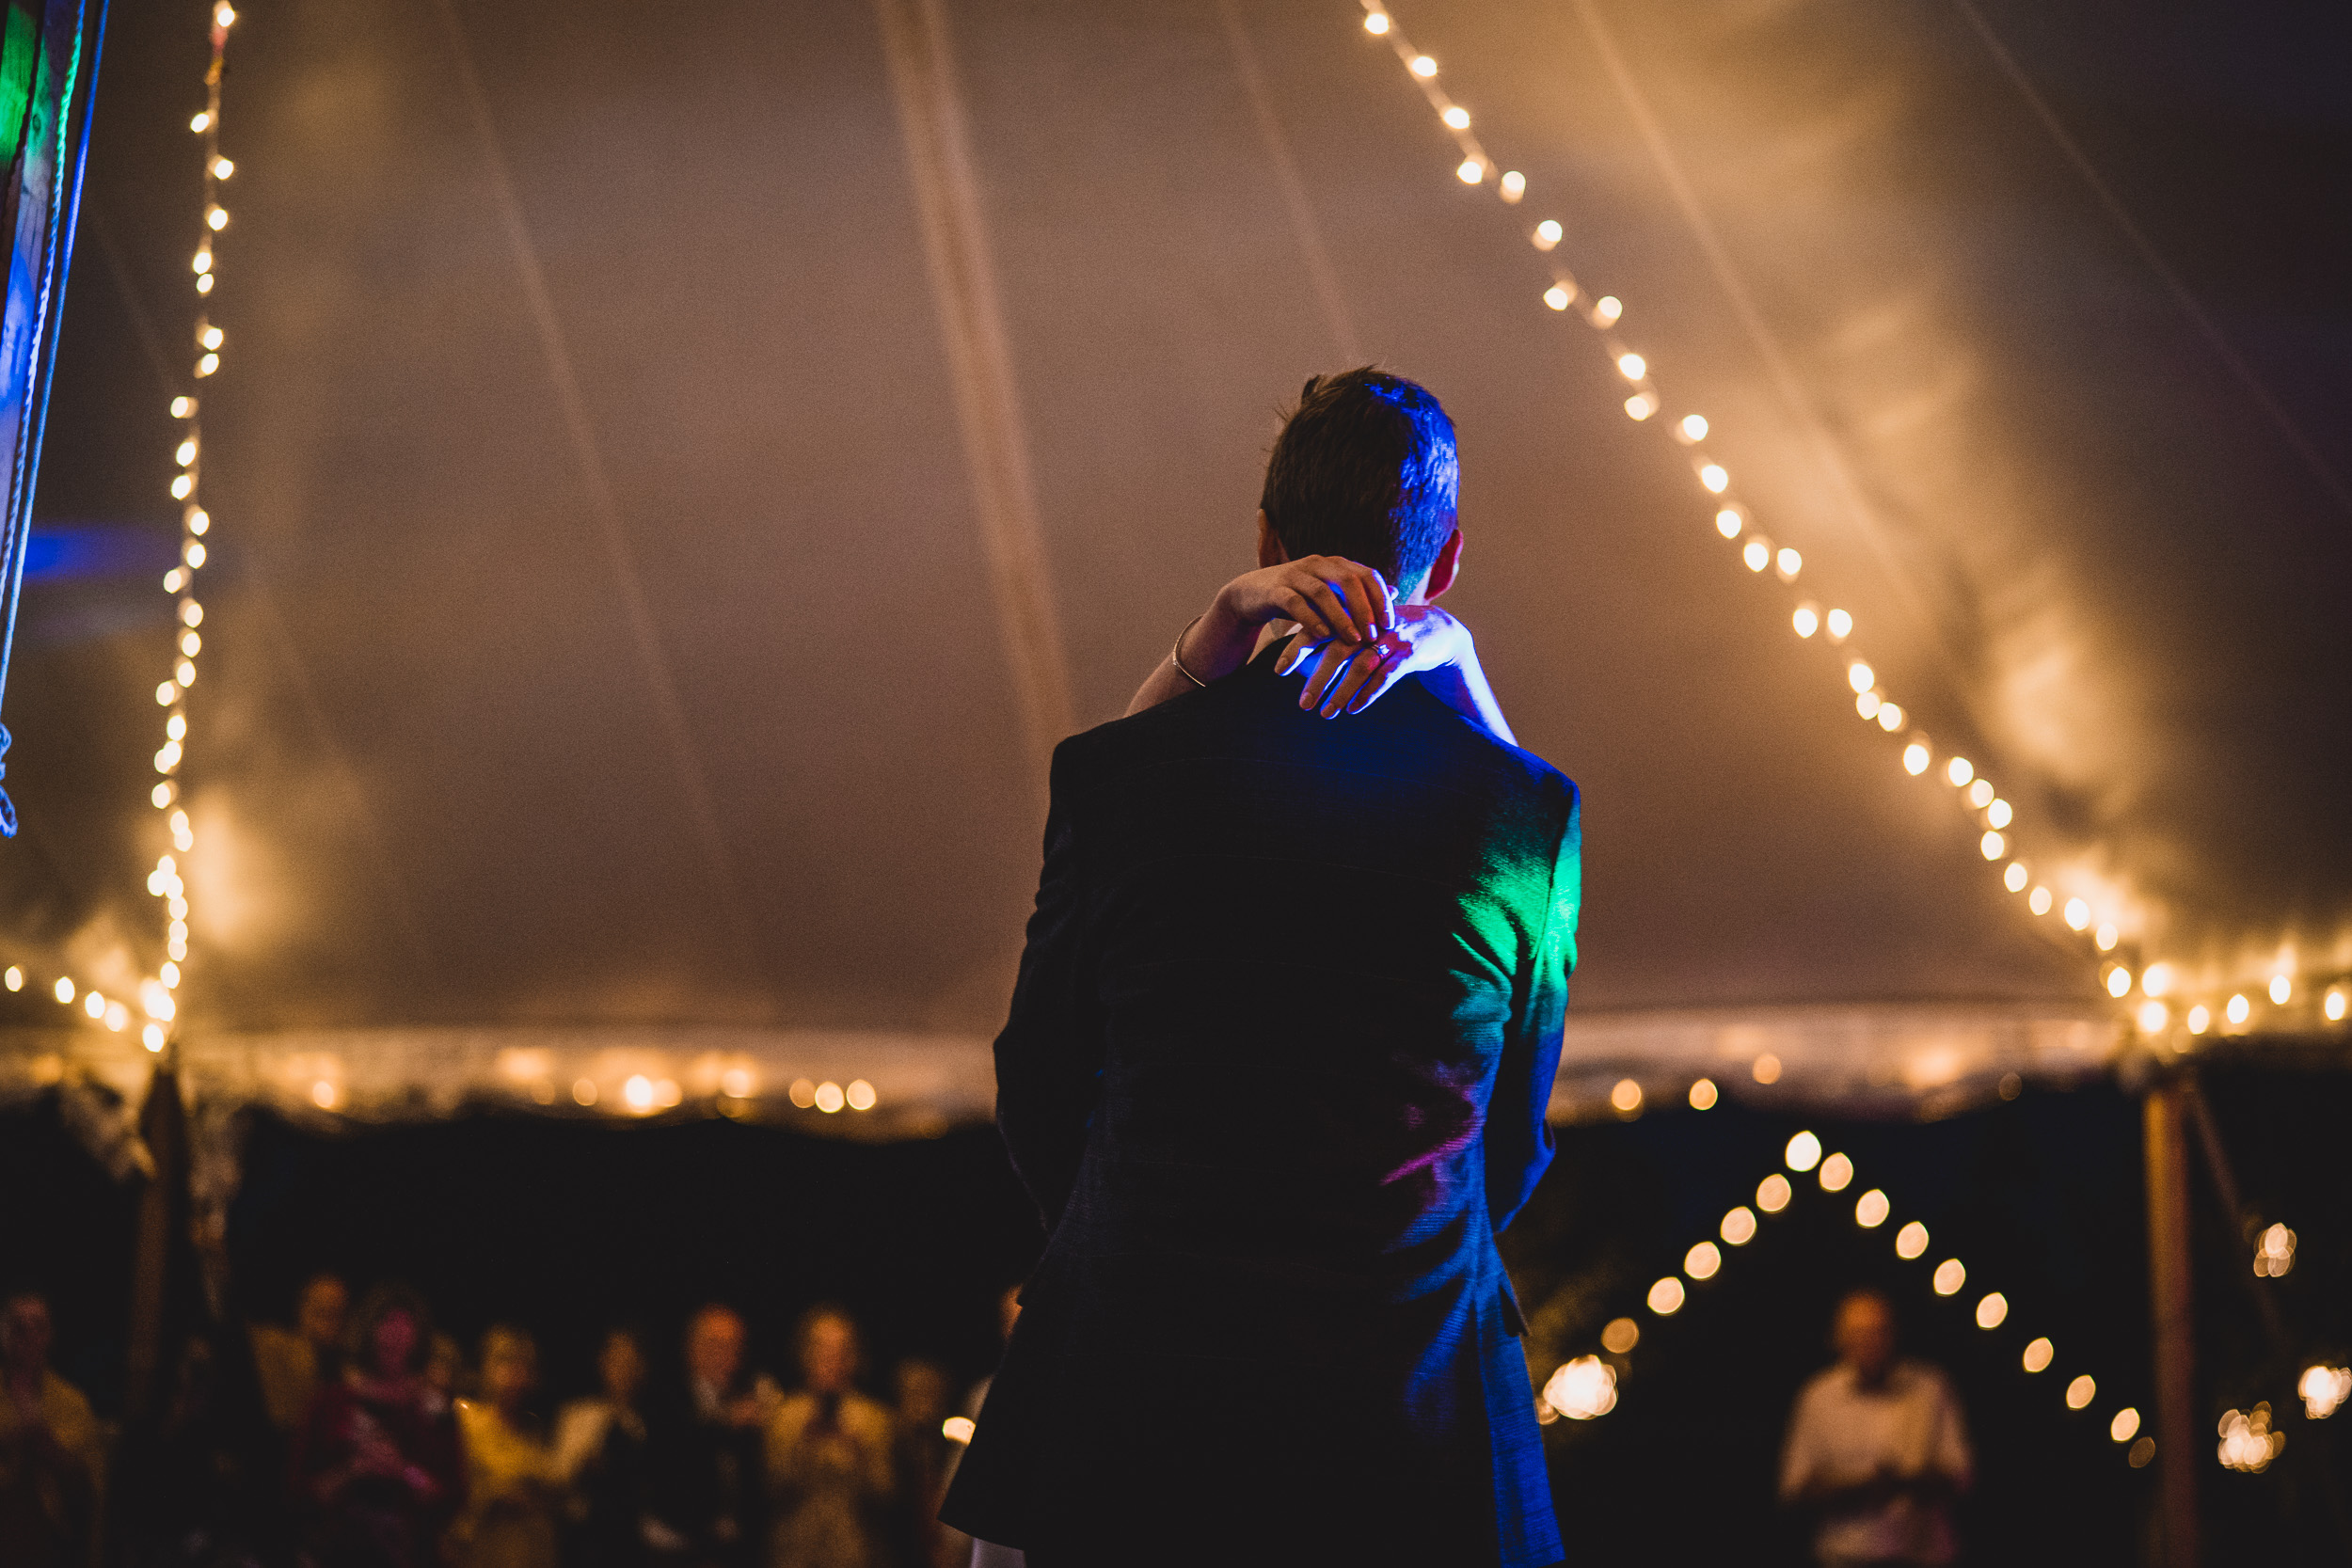 A wedding photographer captures a sweet moment of the groom embracing his bride inside a tent.